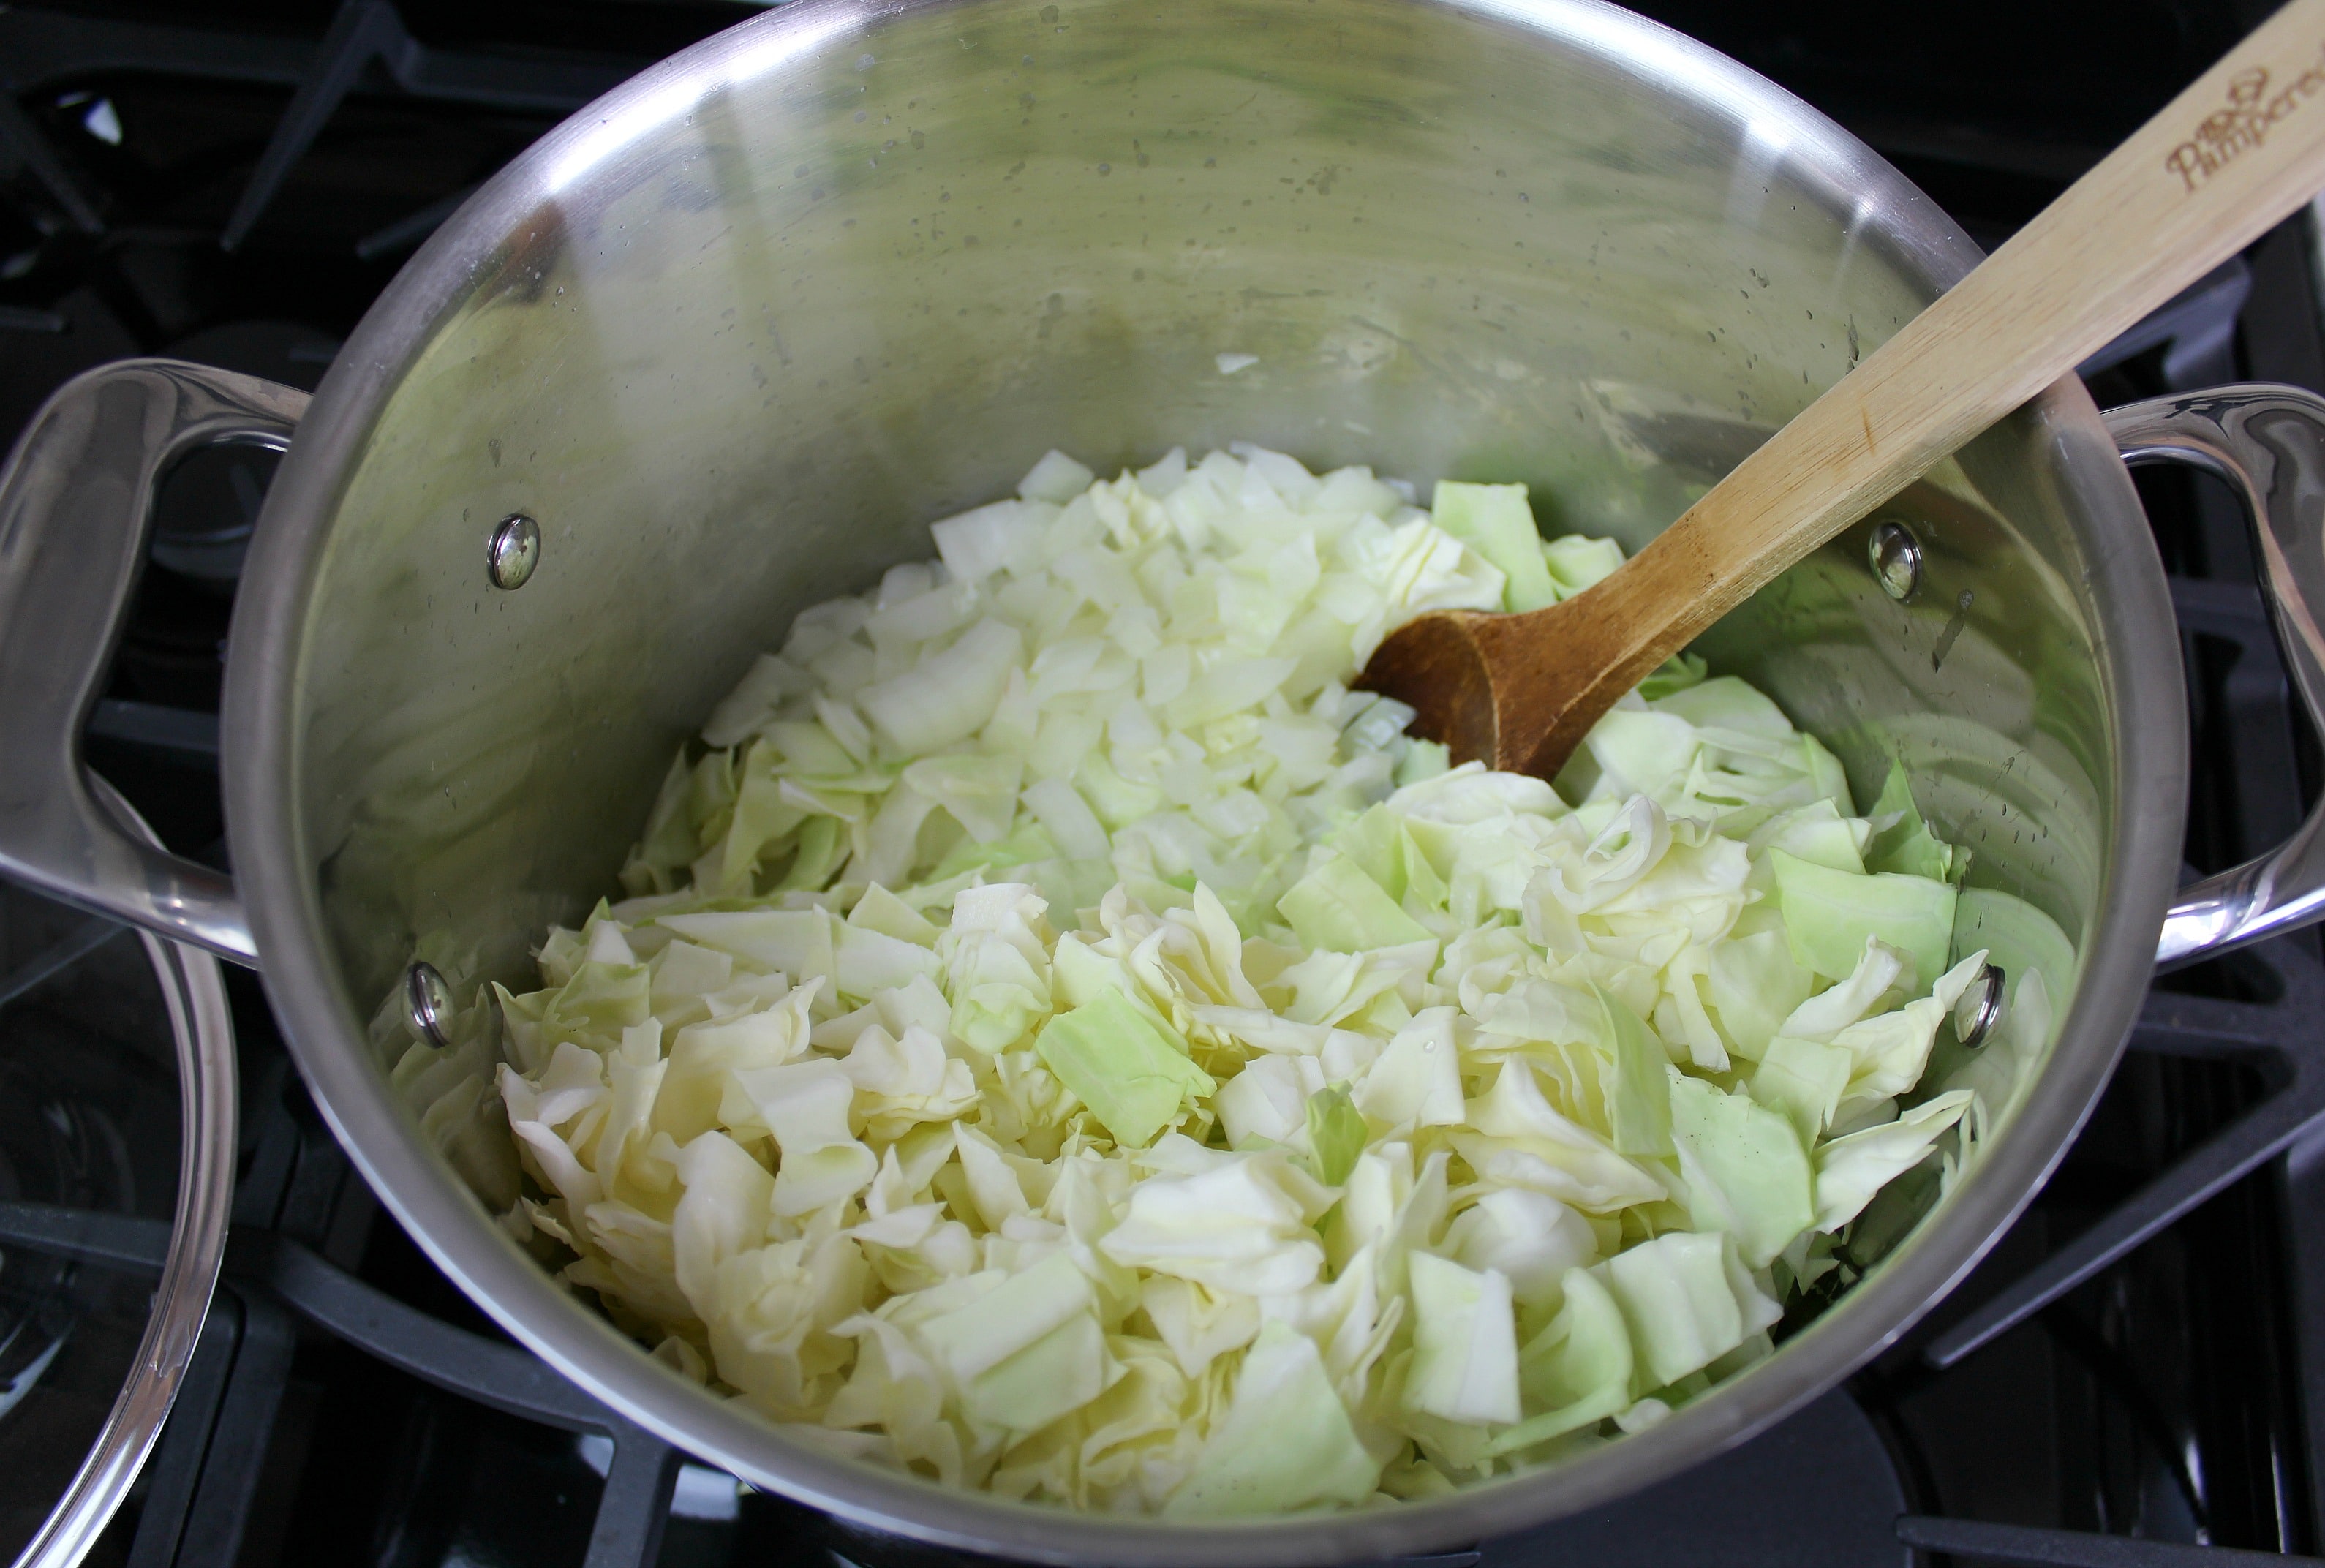 Chop onions and cabbage. Cook with butter for about 7 minutes.